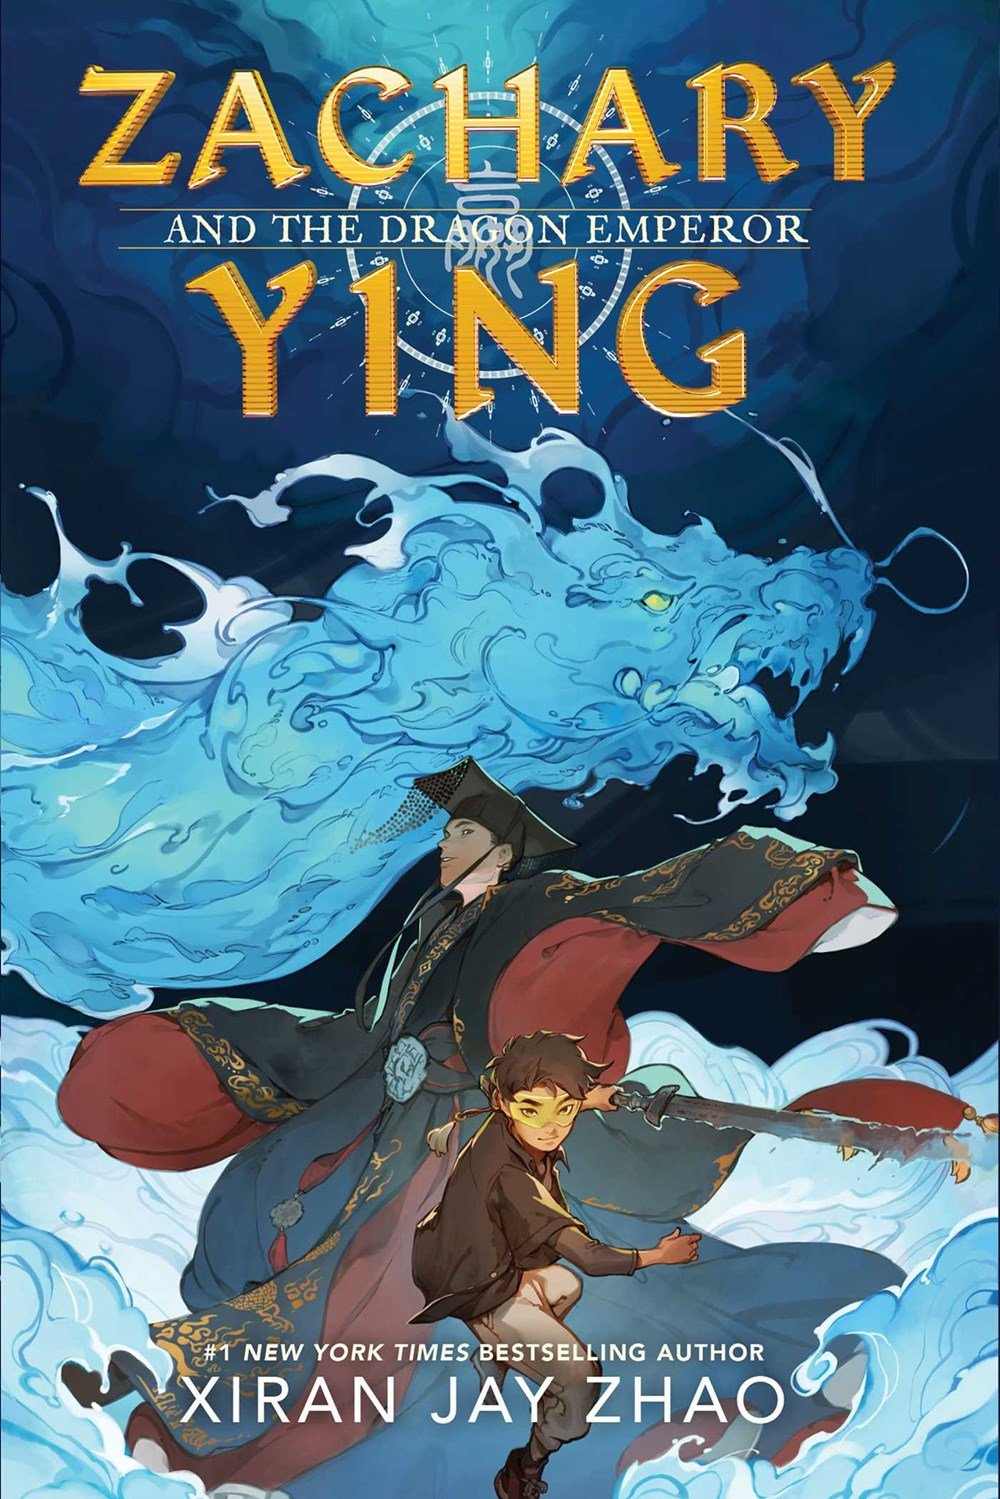 Zachary Ying and the Dragon Emperor by Xiran Jay Zhao | Middle Grade Chinese Fantasy - Paperbacks & Frybread Co.